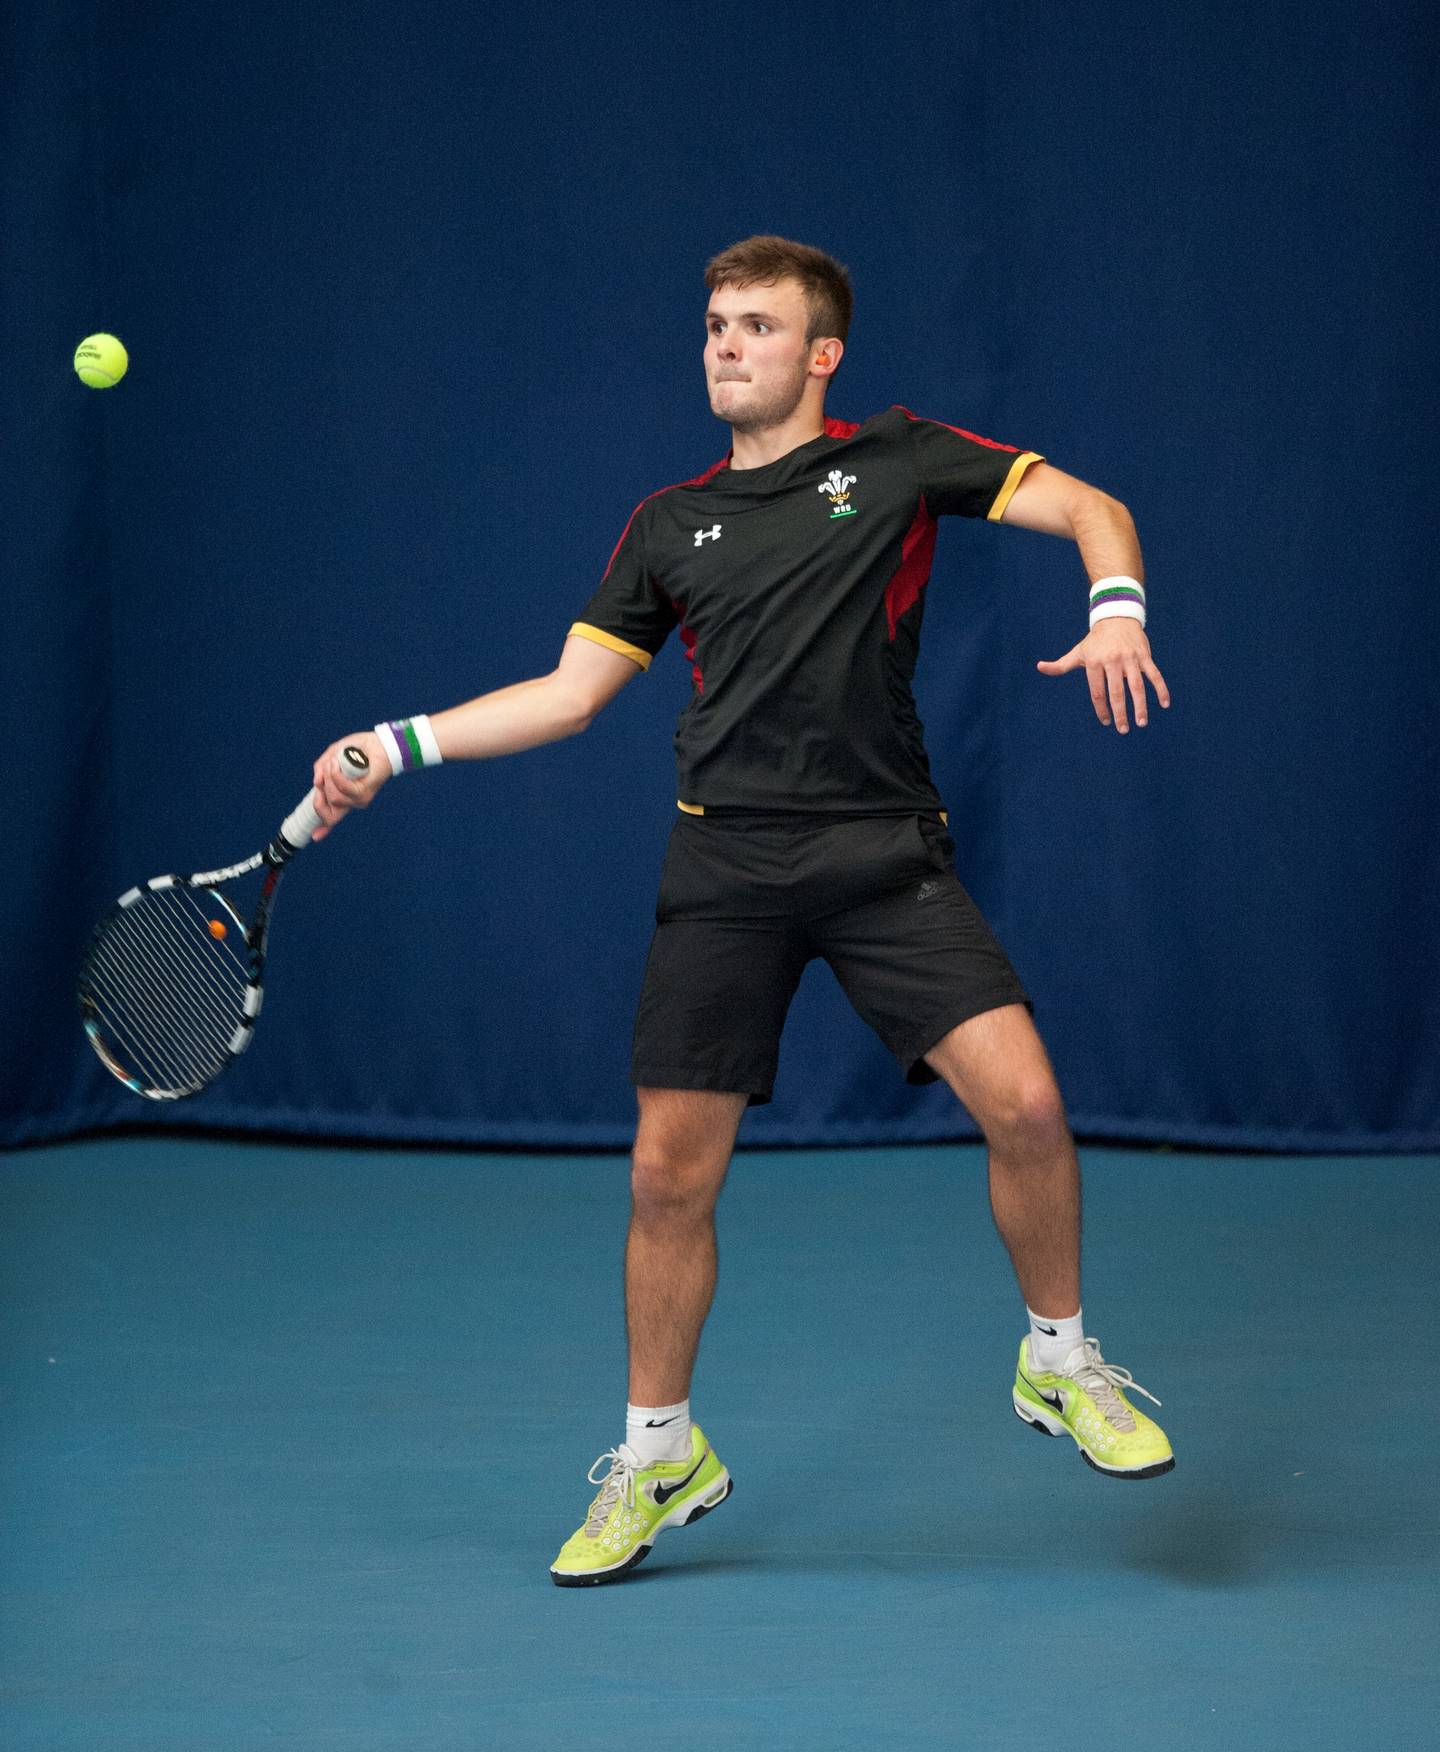 Image shows Shain playing tennis